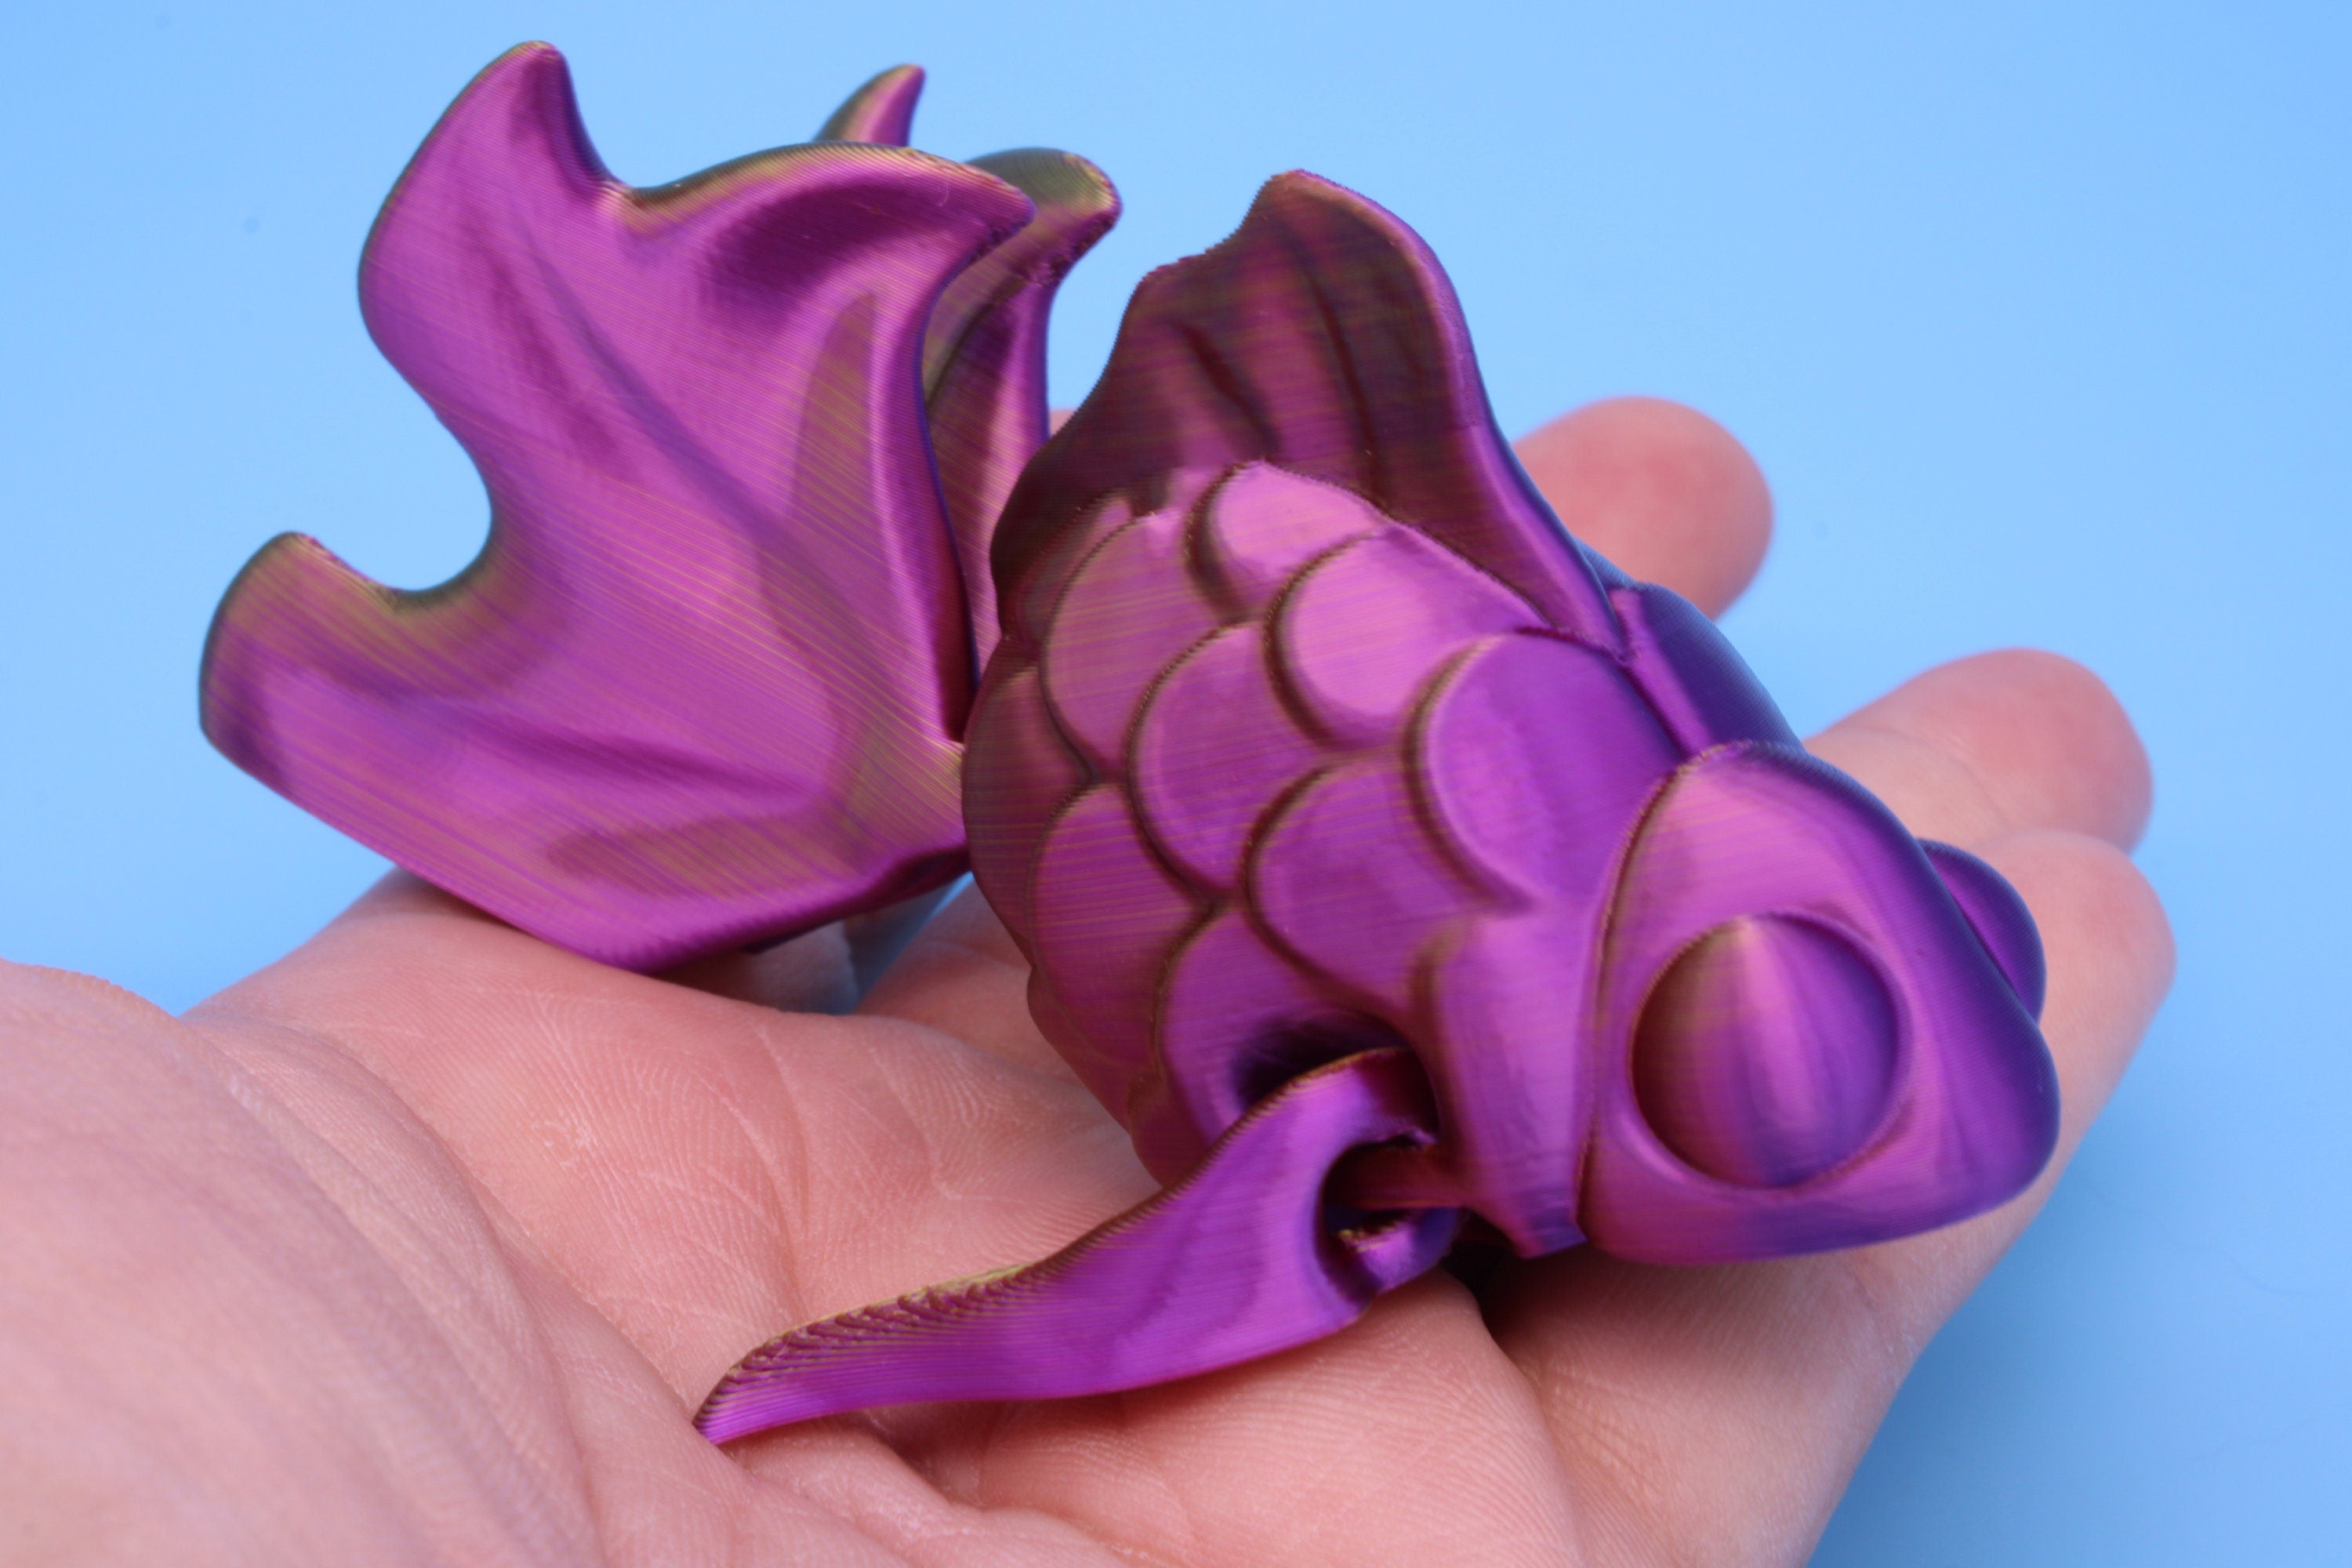 Fancy Gold Fish | 3D Printed